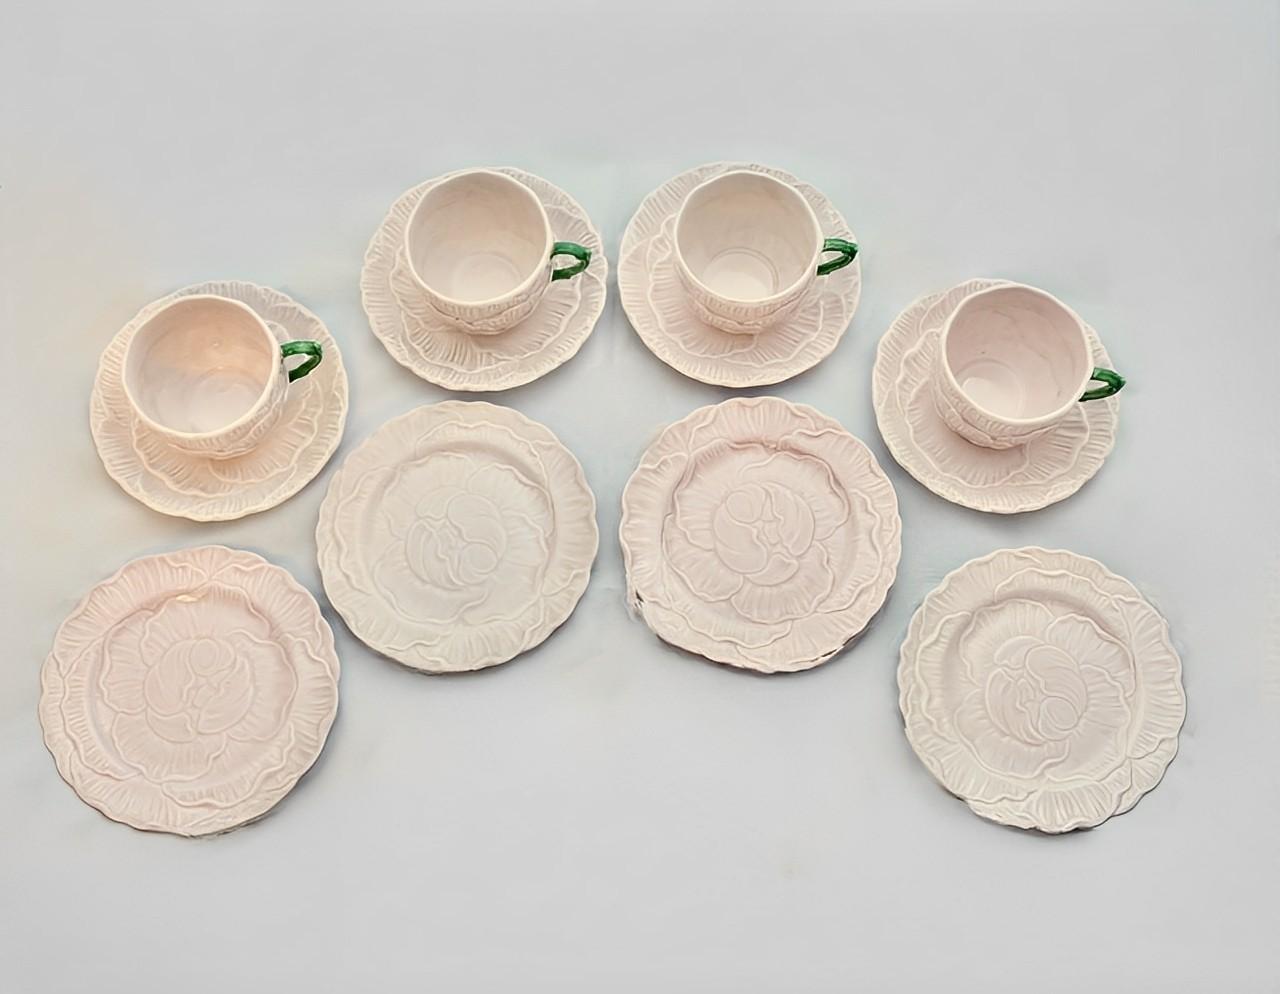 Wonderful Falcon English Rose earthenware tea set, consisting of a set of 4 tea cups saucers and plates. The pieces have a rose design with green handles. The tea plates are diameter 15.3 cm / 6 inches, and the cup is height 6.7 cm / 2.6 inches. The